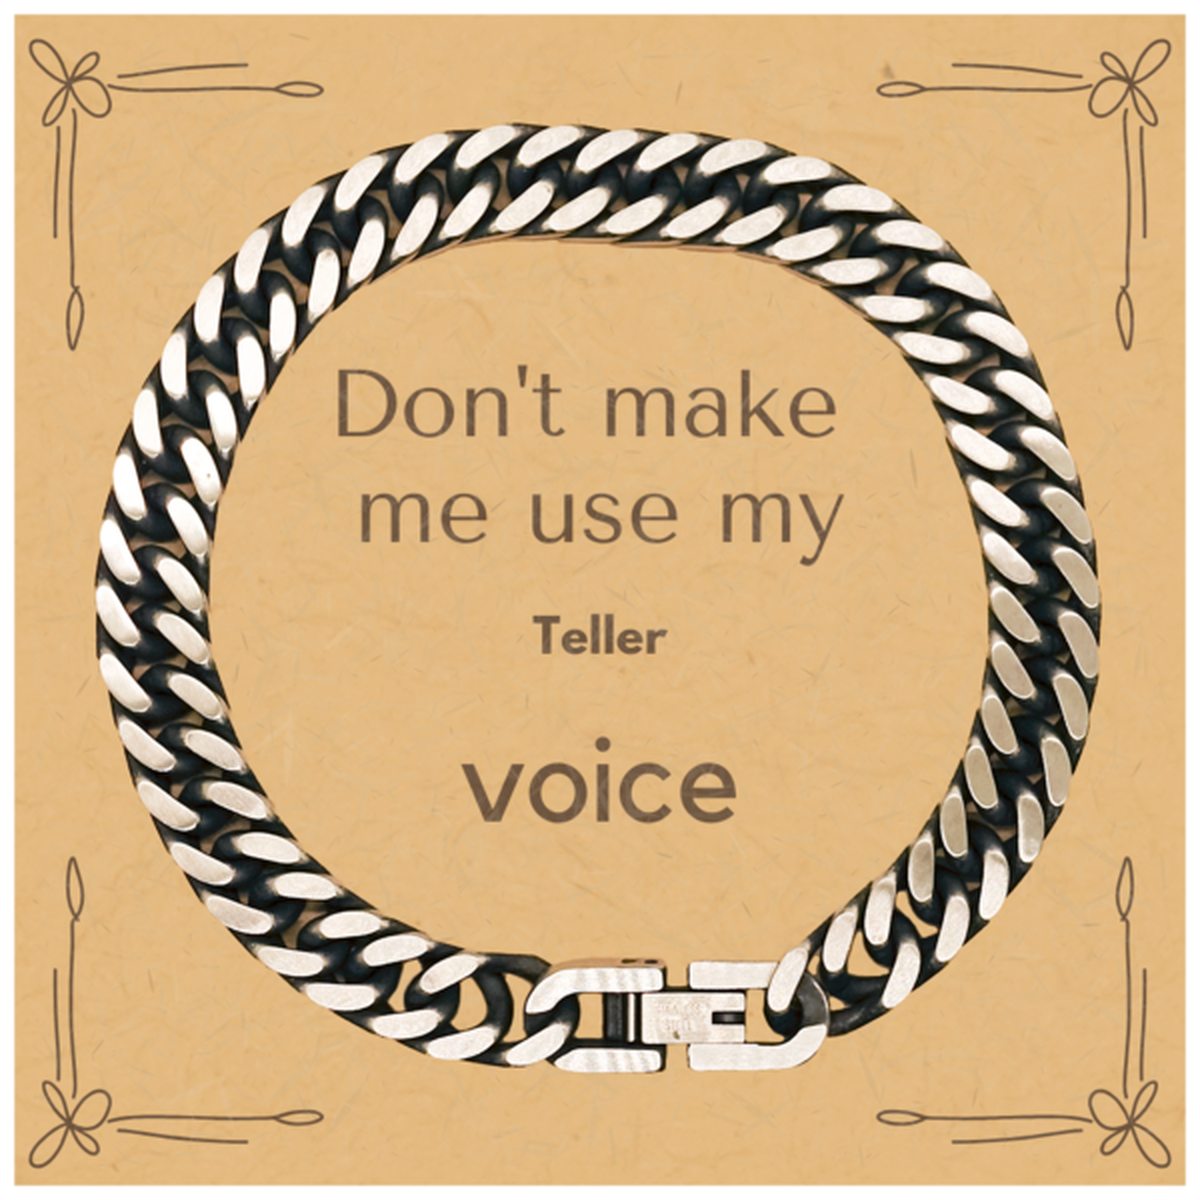 Don't make me use my Teller voice, Sarcasm Teller Card Gifts, Christmas Teller Cuban Link Chain Bracelet Birthday Unique Gifts For Teller Coworkers, Men, Women, Colleague, Friends